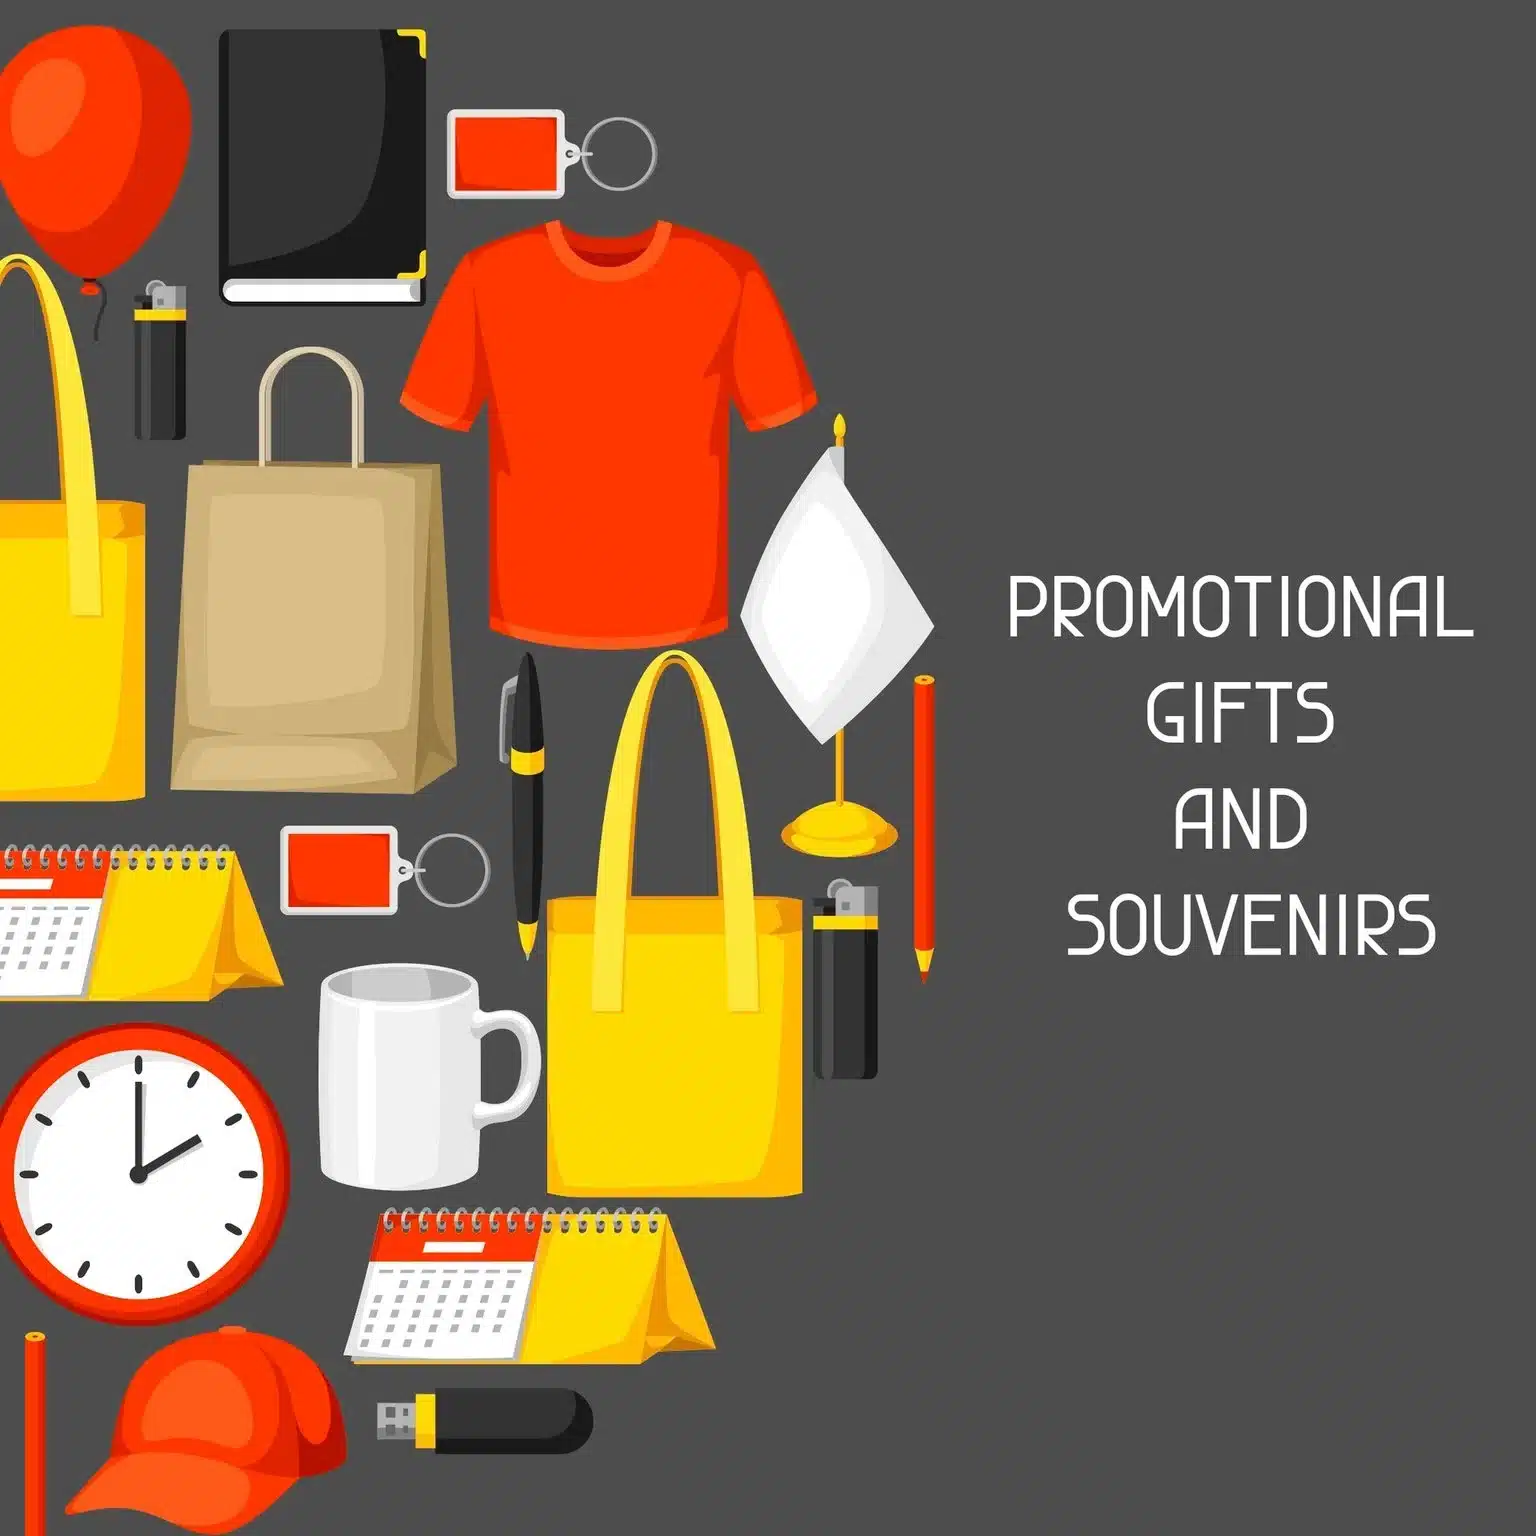 Choosing the Best Business Promotional Products for Small Business Owners